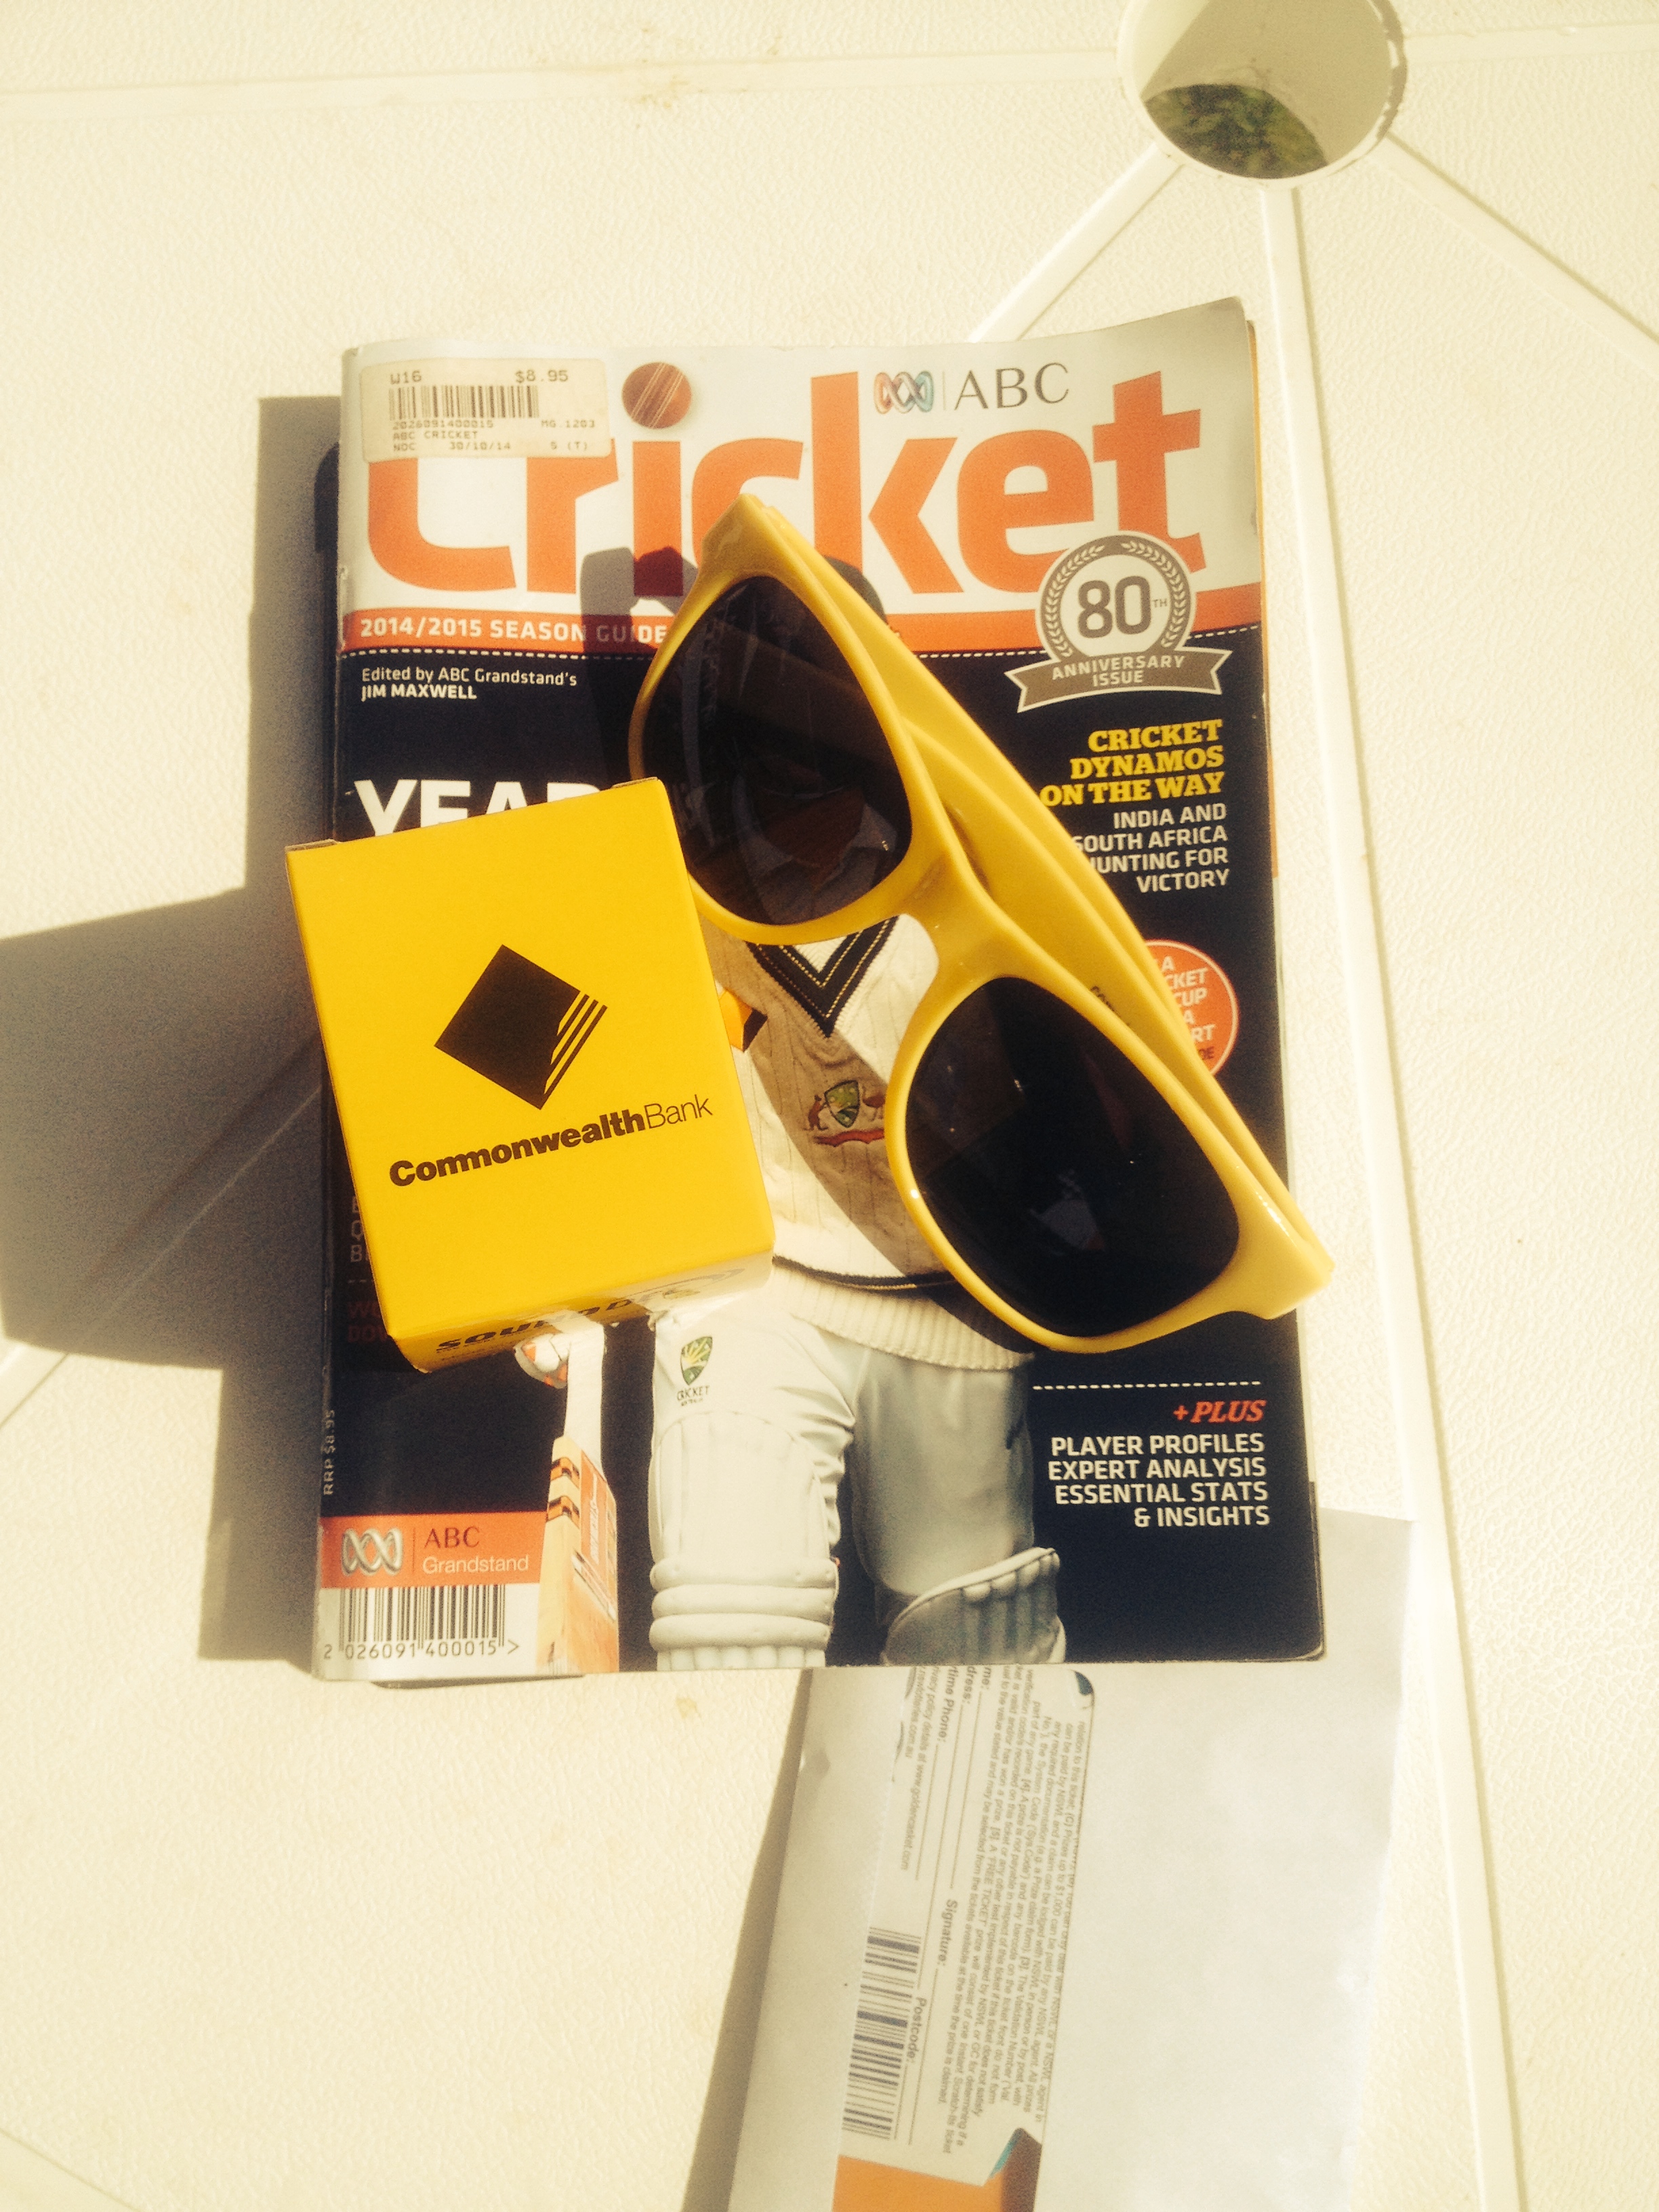 Free sunglasses and in ear radios for fans at each Test match